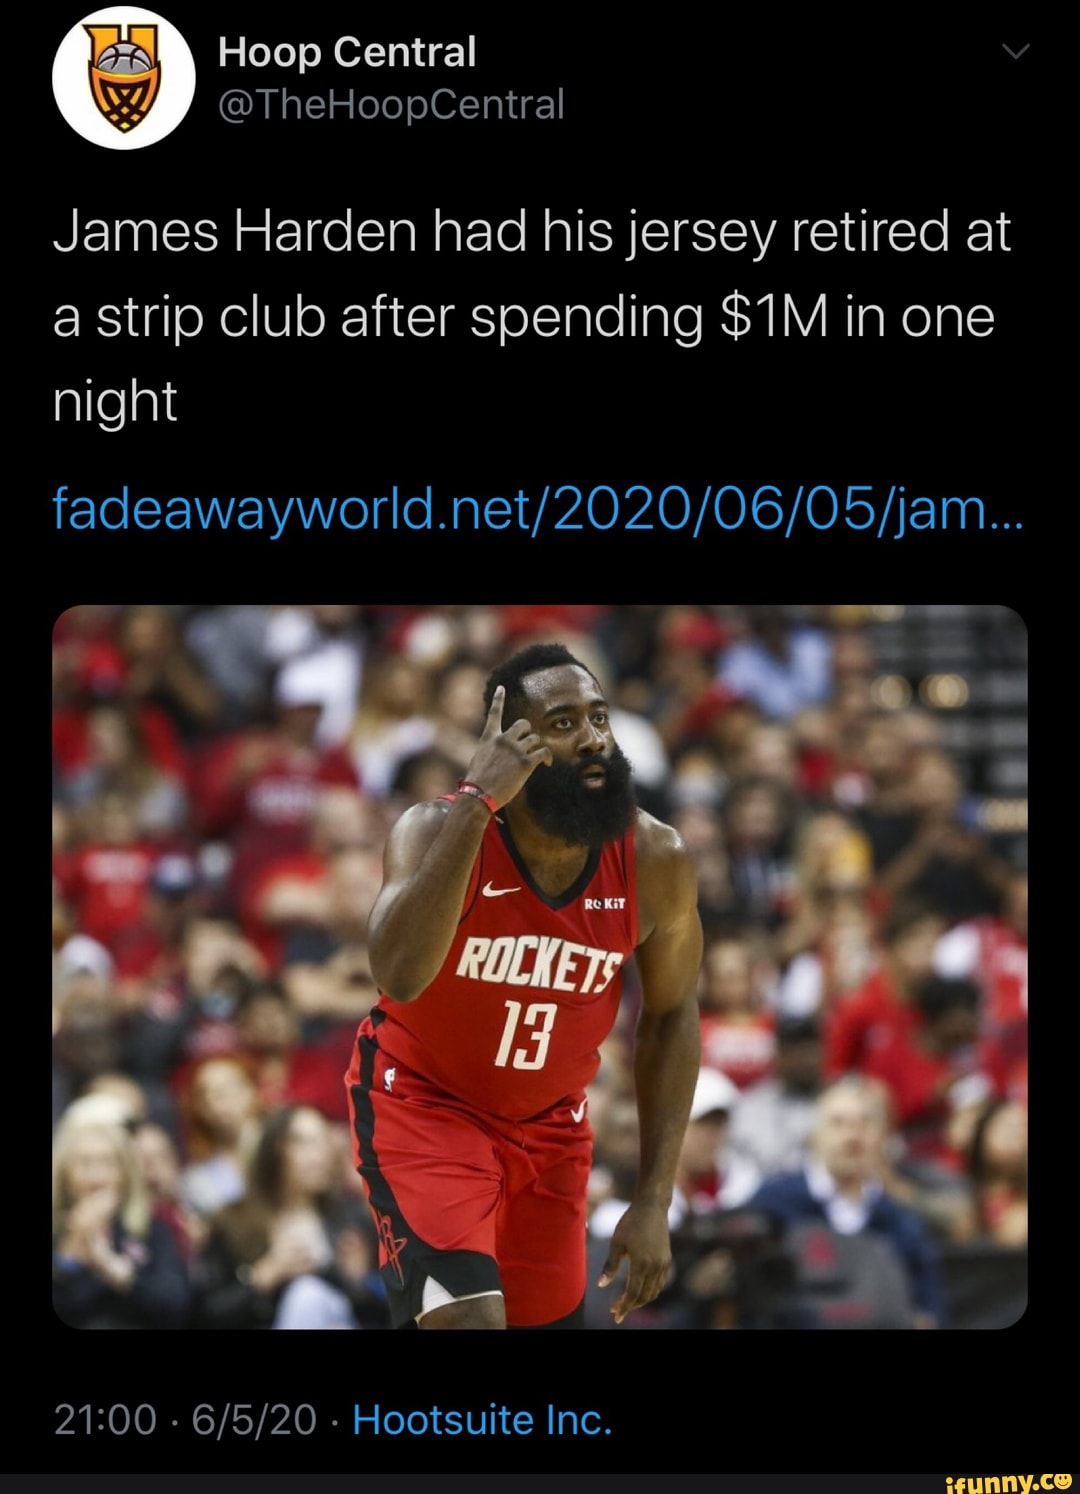 James Harden's jersey retired at strip club after spending $1m in